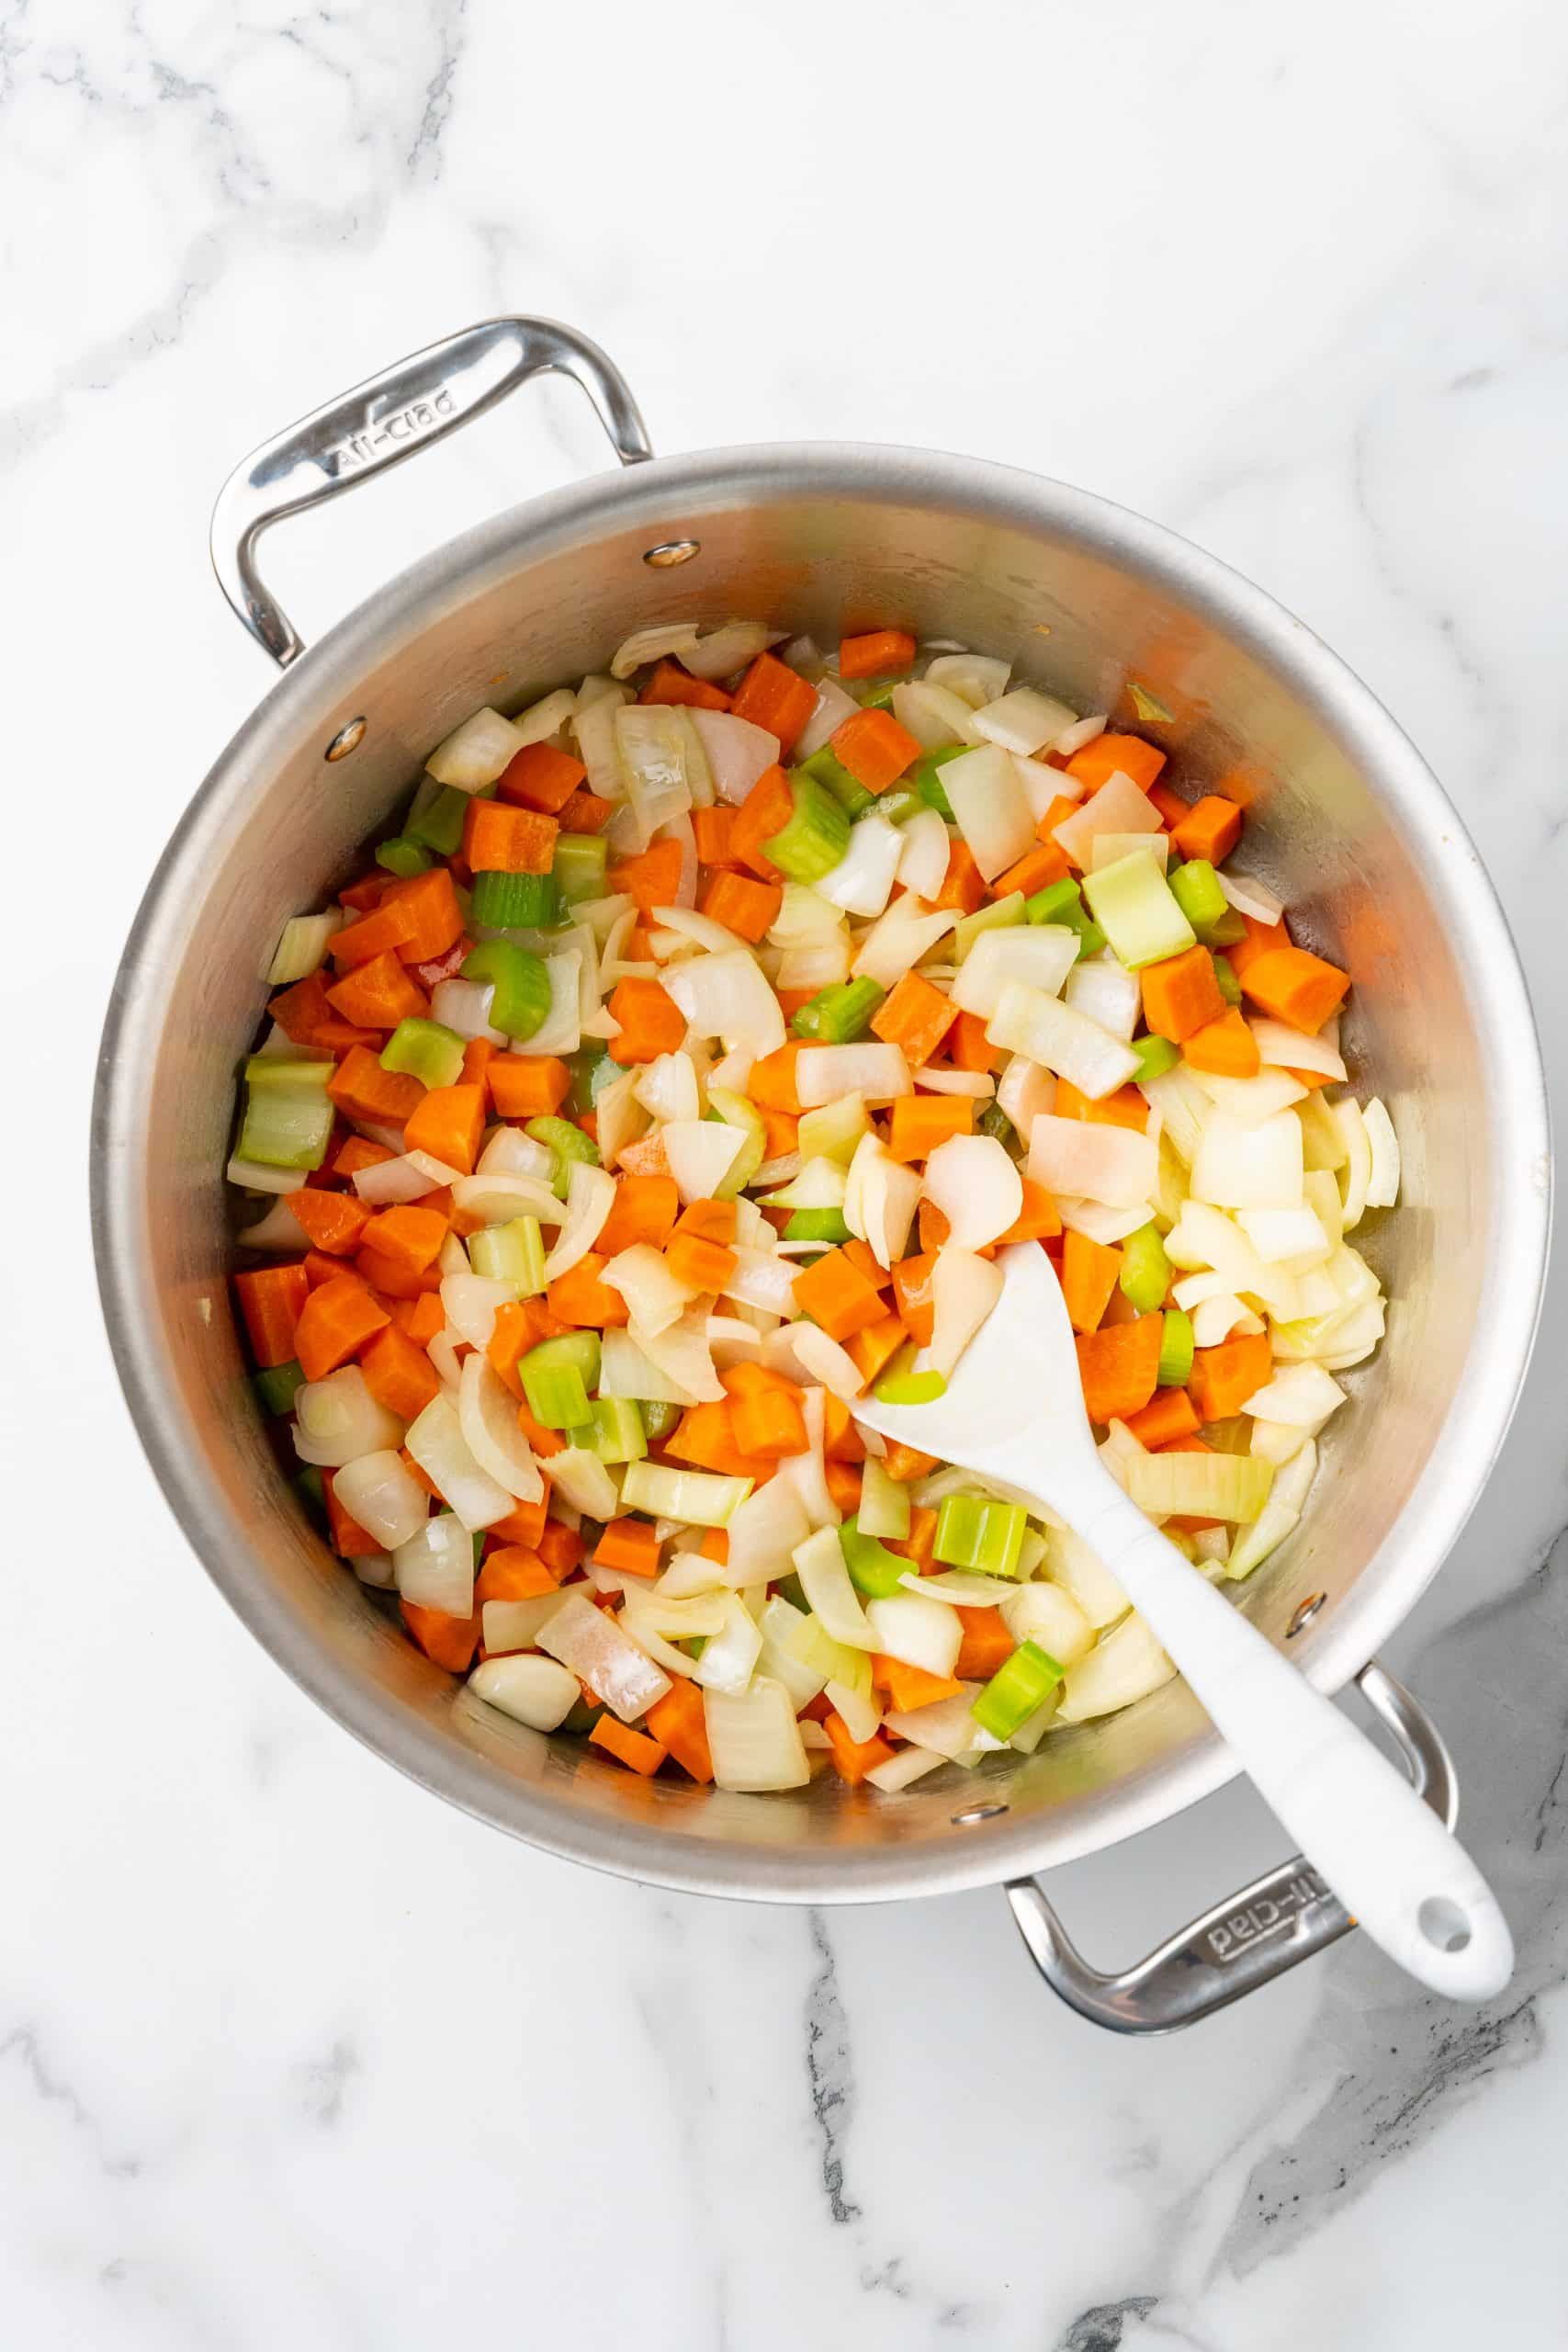 a sauteed mirepoix vegetable mix in a silver pot